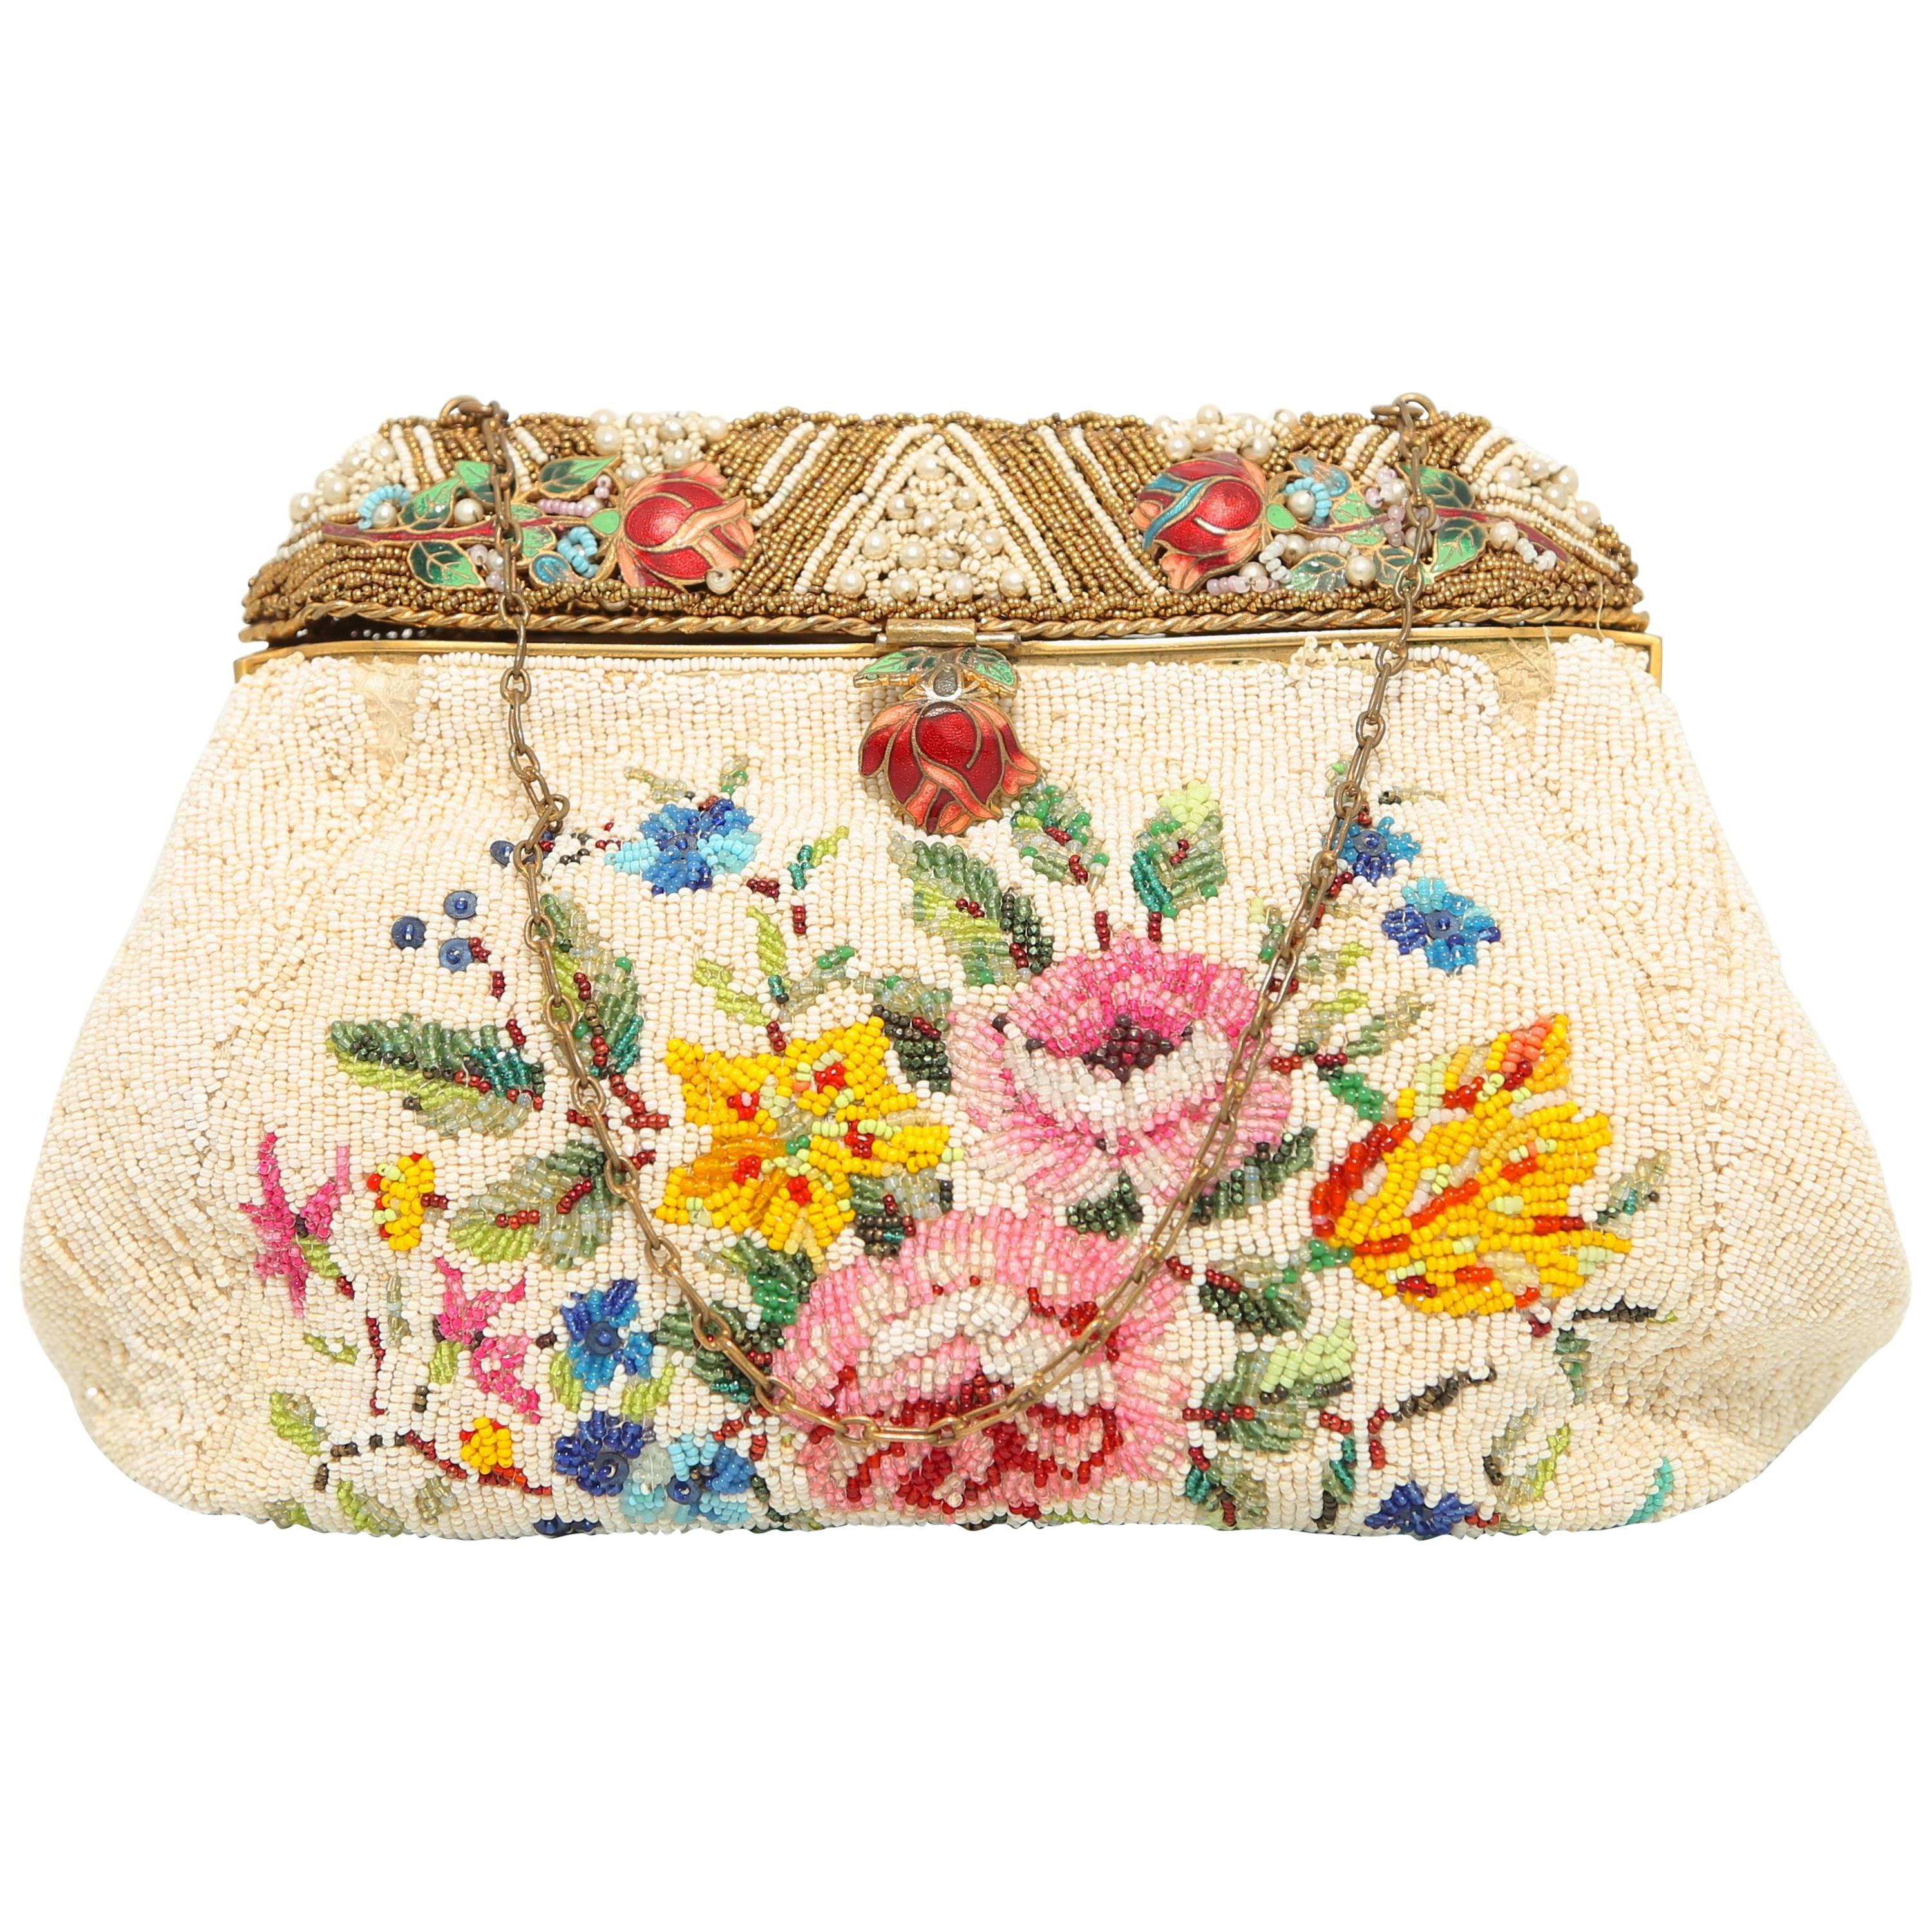 1920s fully beaded bag with floral pattern enamel handle with small pearls  